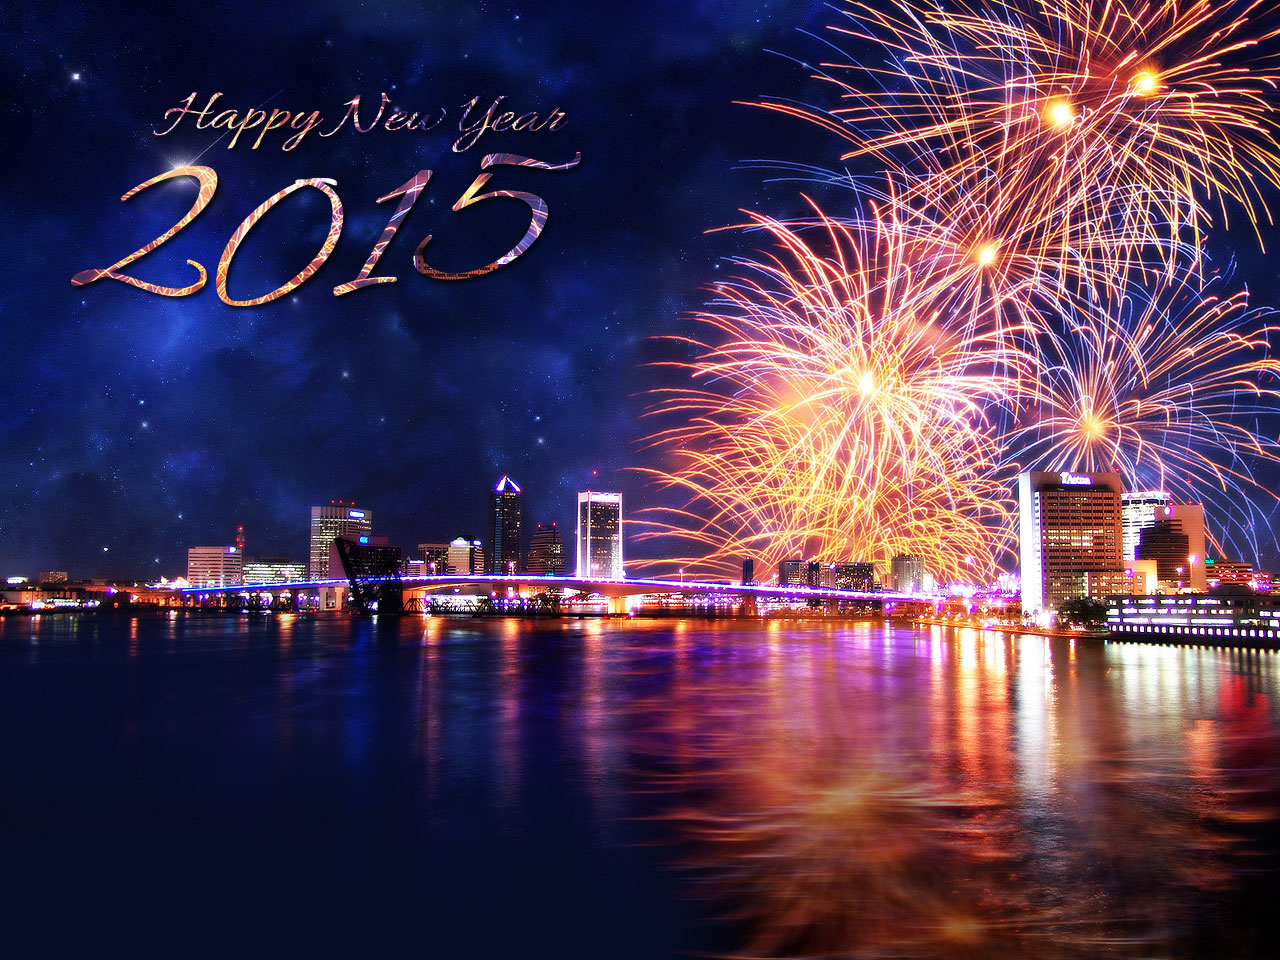 Happy New Year 2015 Wallpapers Images amp Cover photos